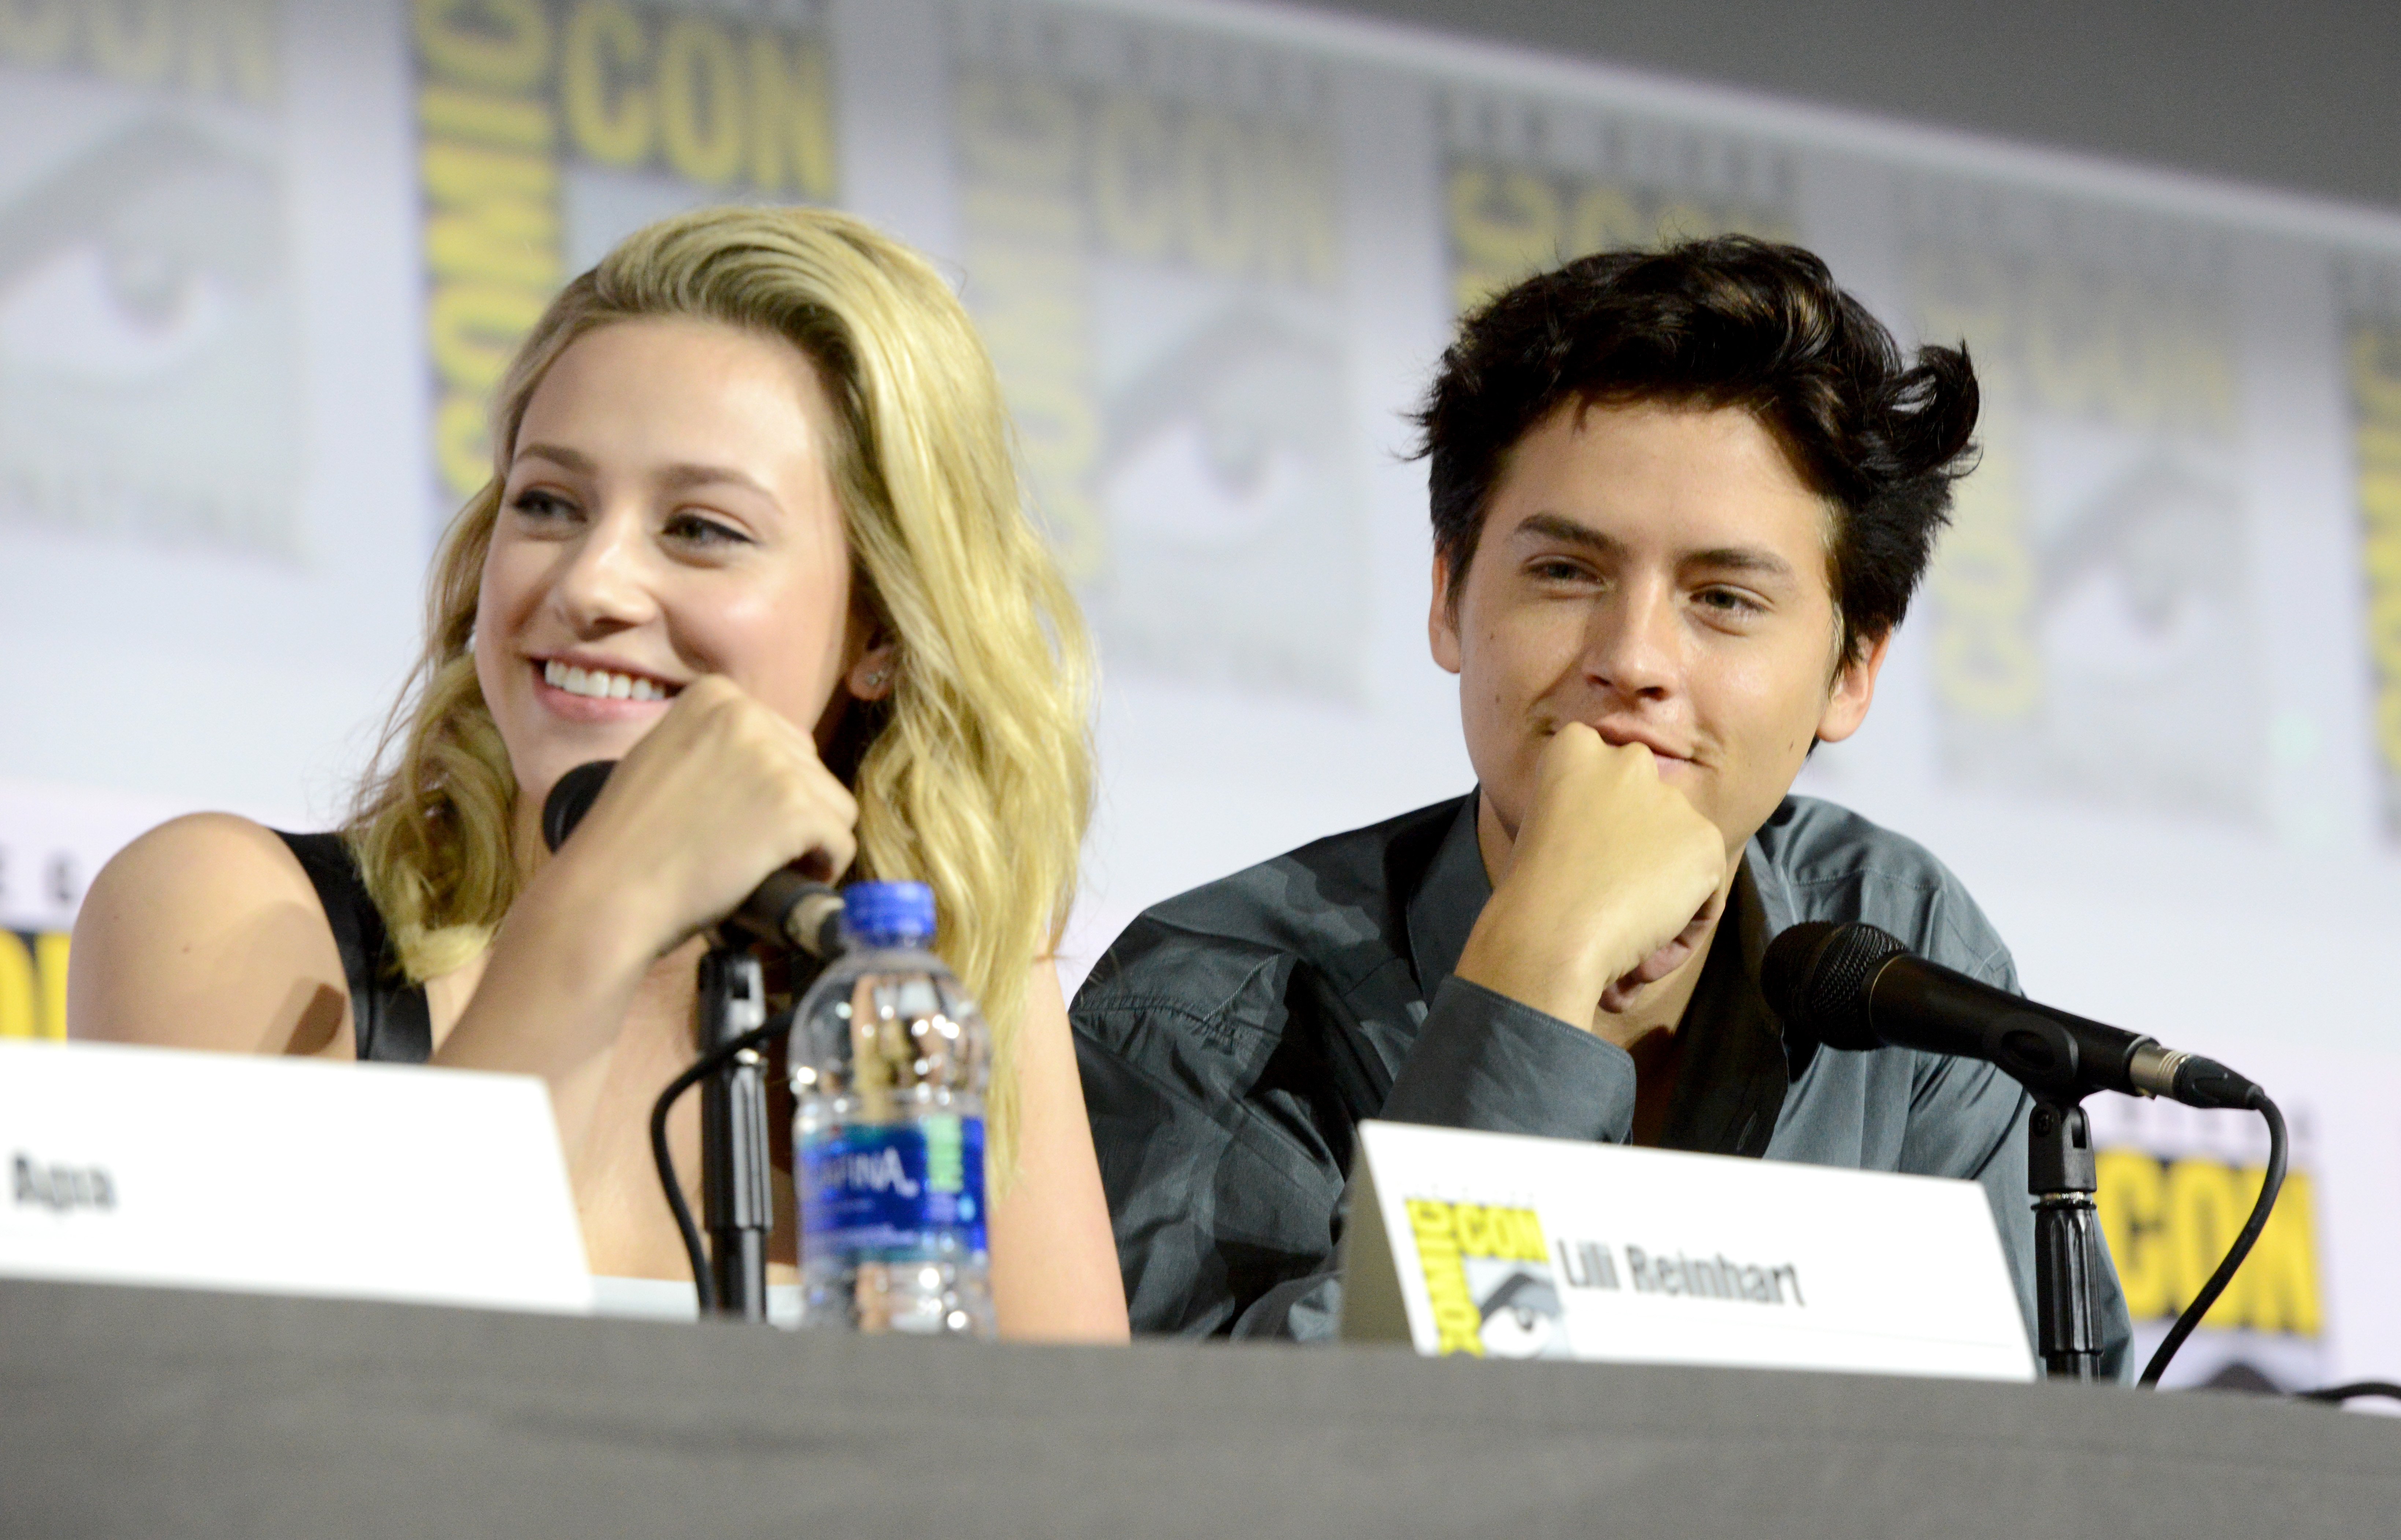 Lili Reinhart and Cole Sprouse at the 2019 Comic-Con International on July 21, 2019, in San Diego, California. | Source: Getty Images